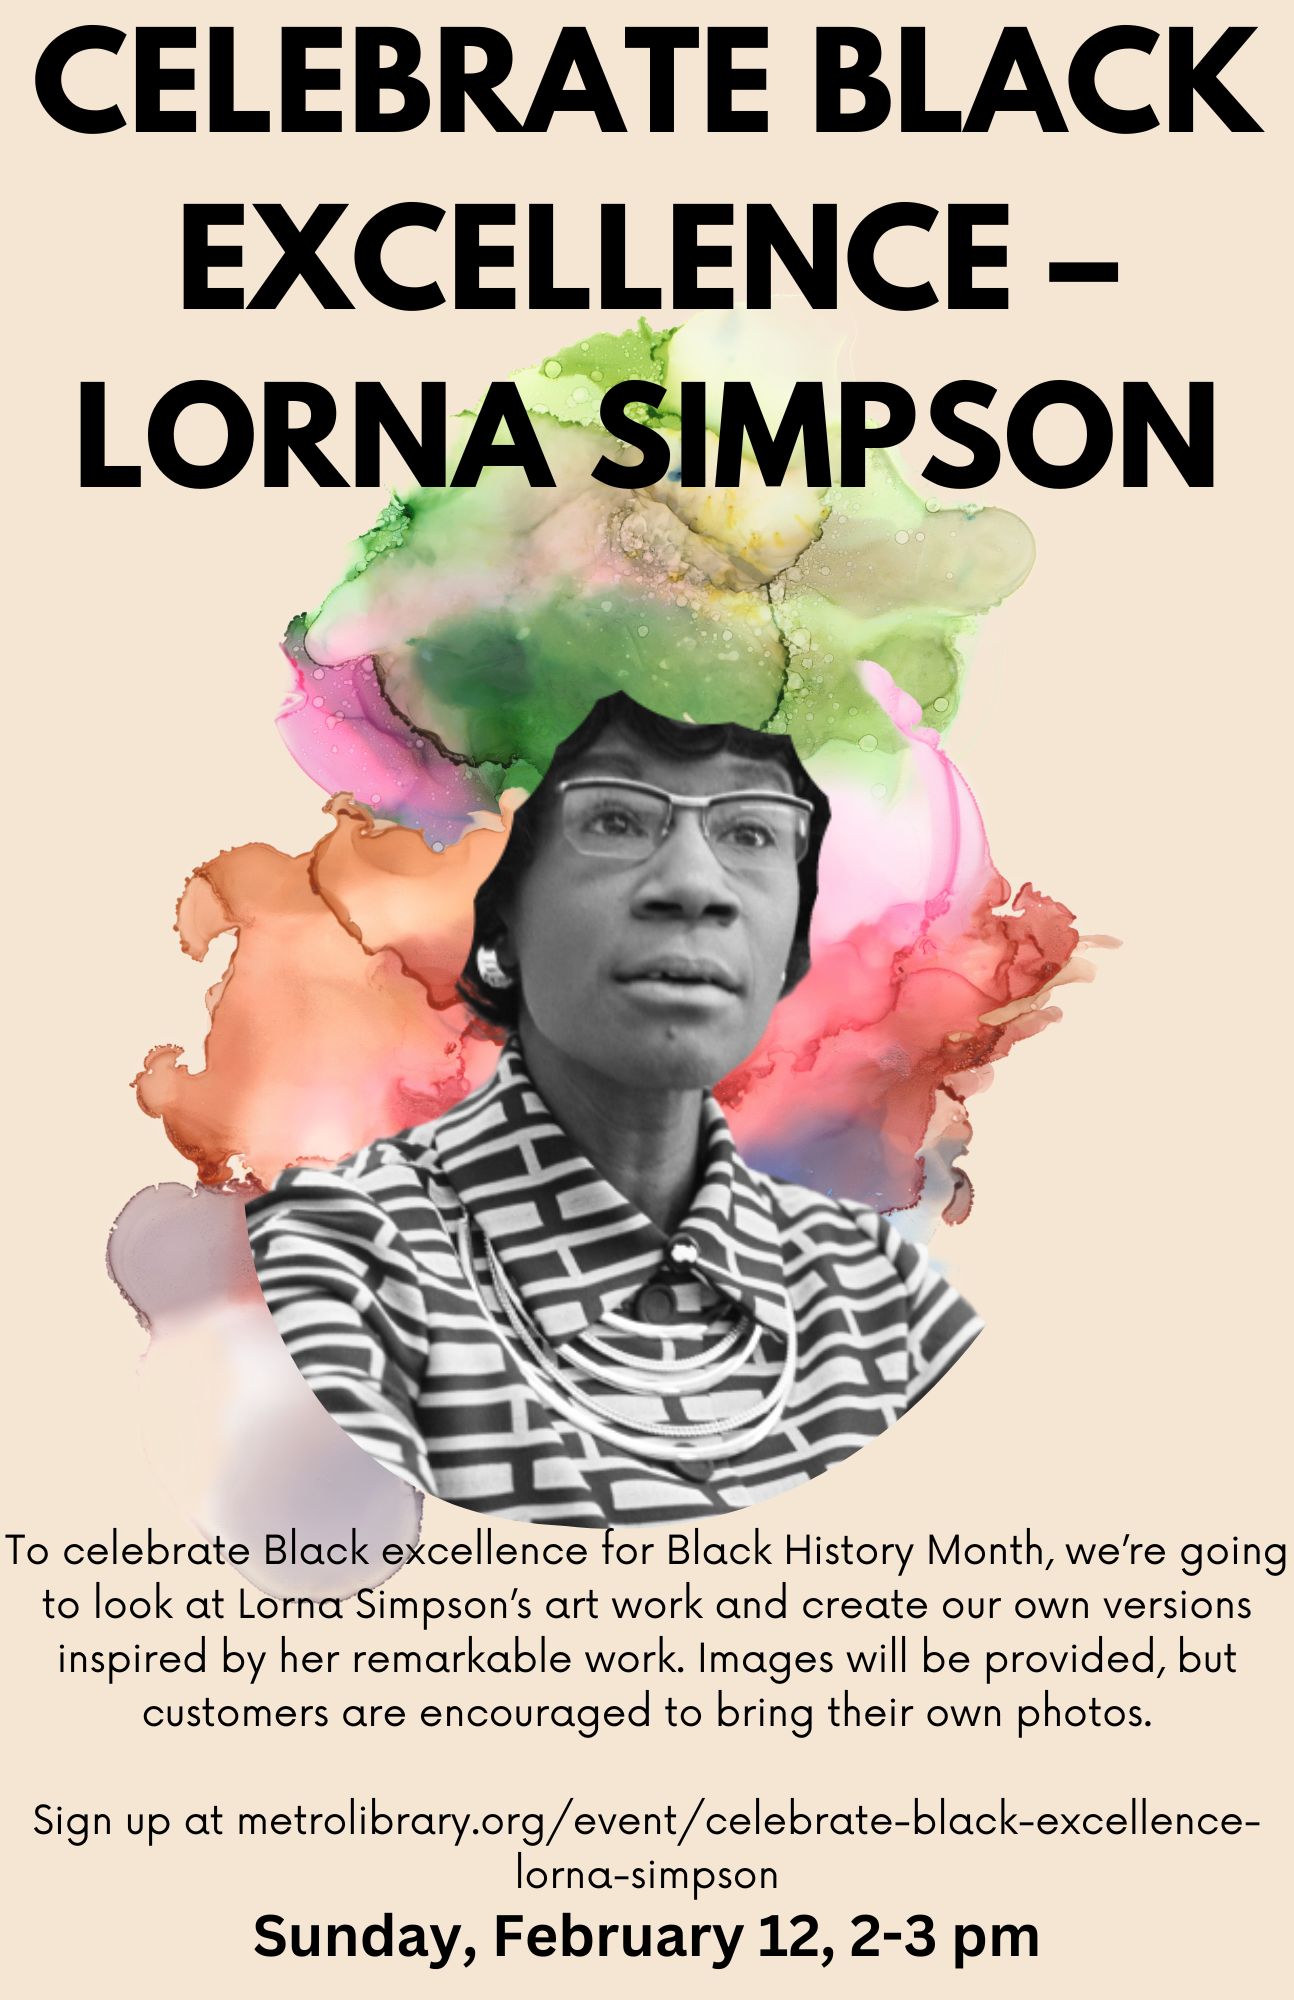 The flyer for the CELEBRATE BLACK EXCELLENCE – LORNA SIMPSON program. The flyer features a collage of Shirley Chisholm with a watercolor background. 